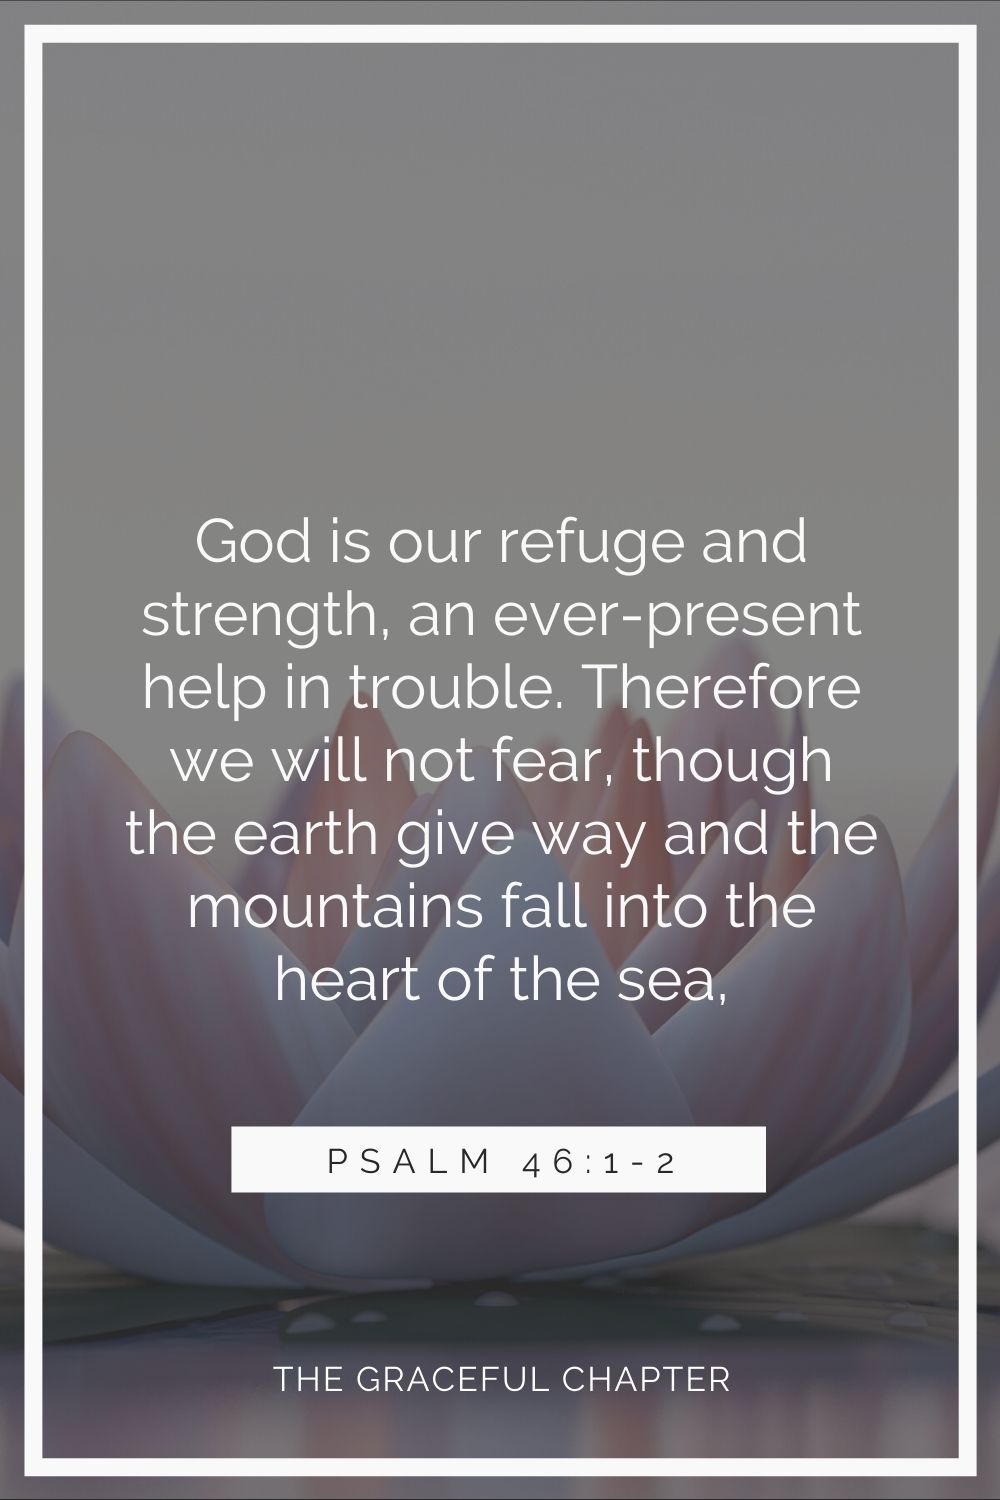 God is our refuge and strength,  an ever-present help in trouble. Therefore we will not fear, though the earth give way and the mountains fall into the heart of the sea. Psalm 46:1-2